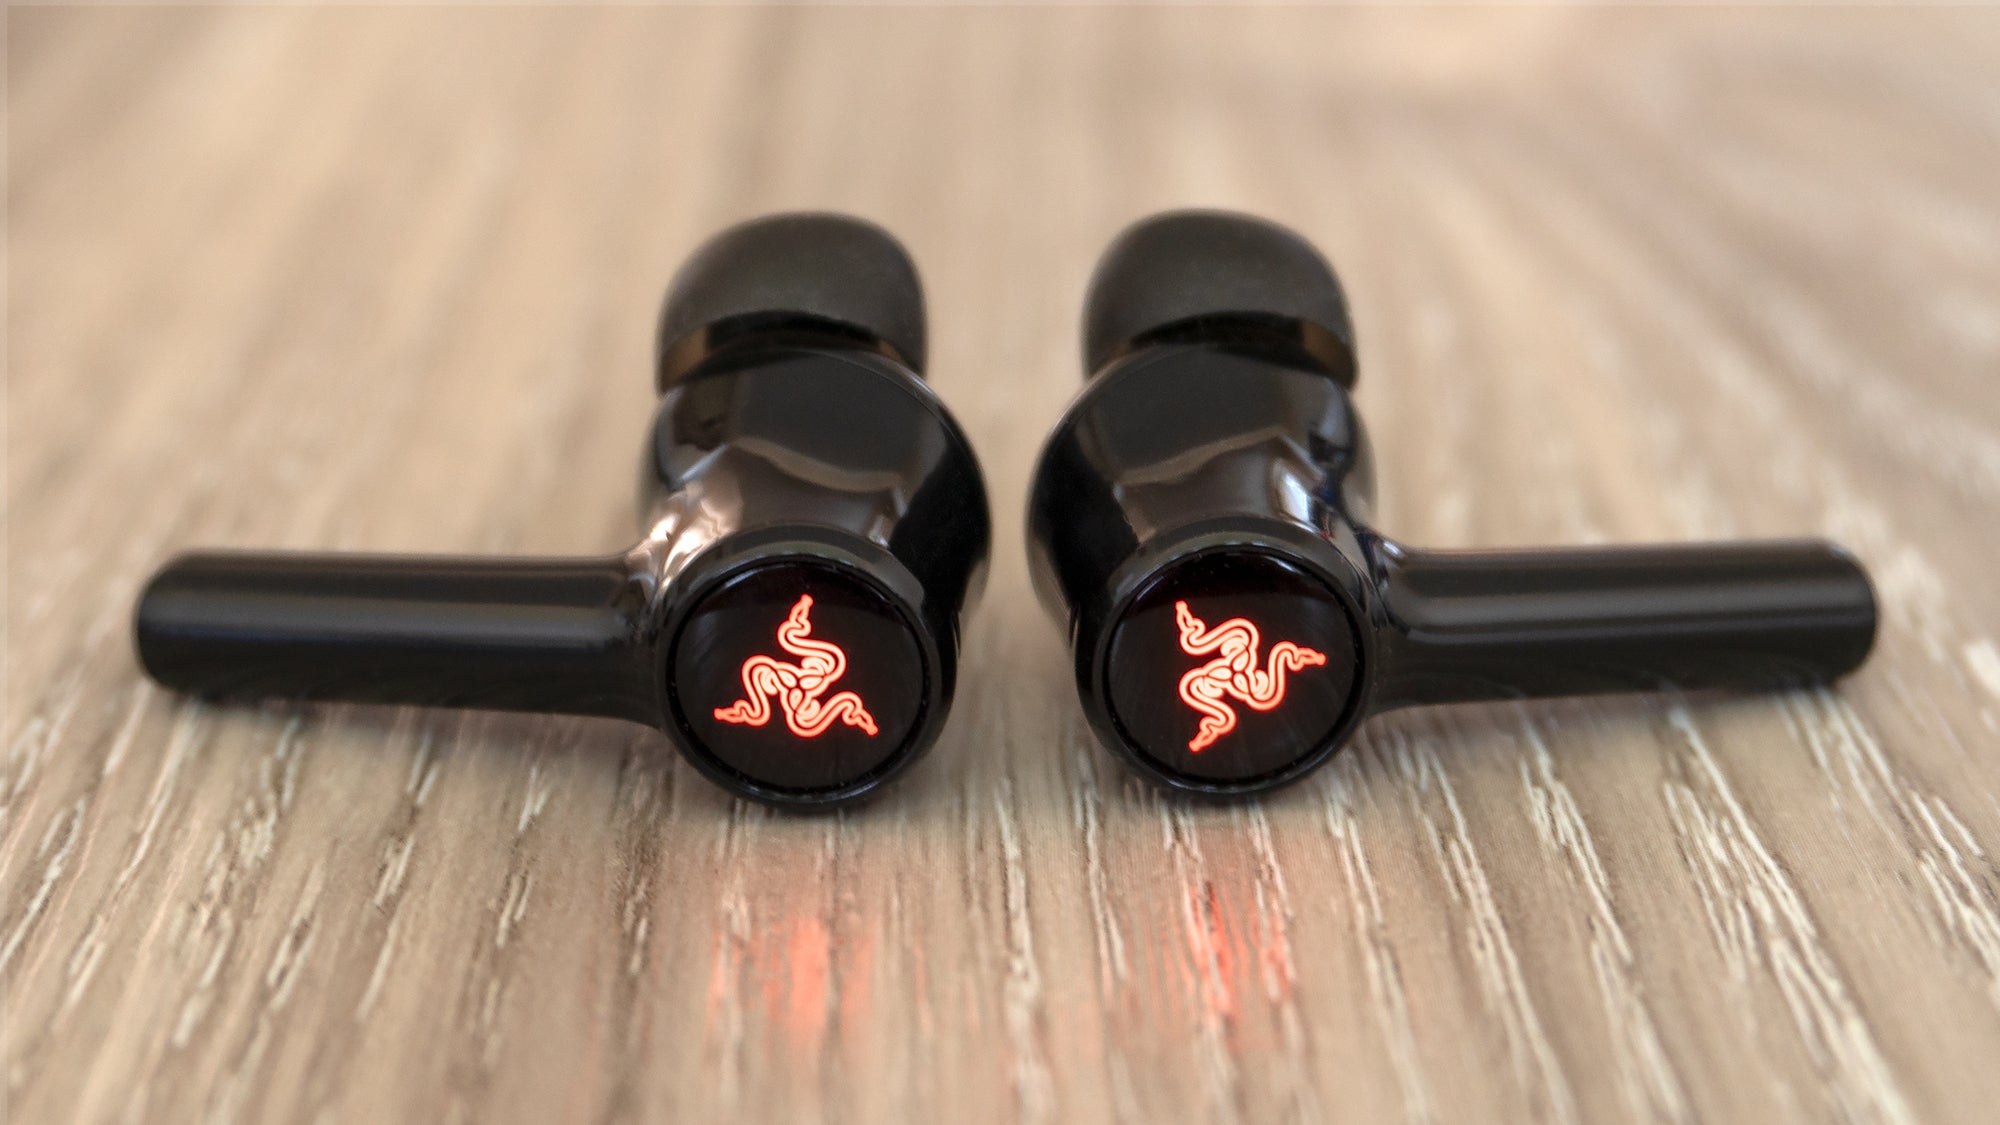 If you're looking for a relatively affordable pair of wireless earbuds, the Razer Hammerhead True Wireless Earbuds deliver excellent sound with decent noise cancellation. You'll just want to turn those LEDs off. (Photo: Andrew Liszewski - Gizmodo)